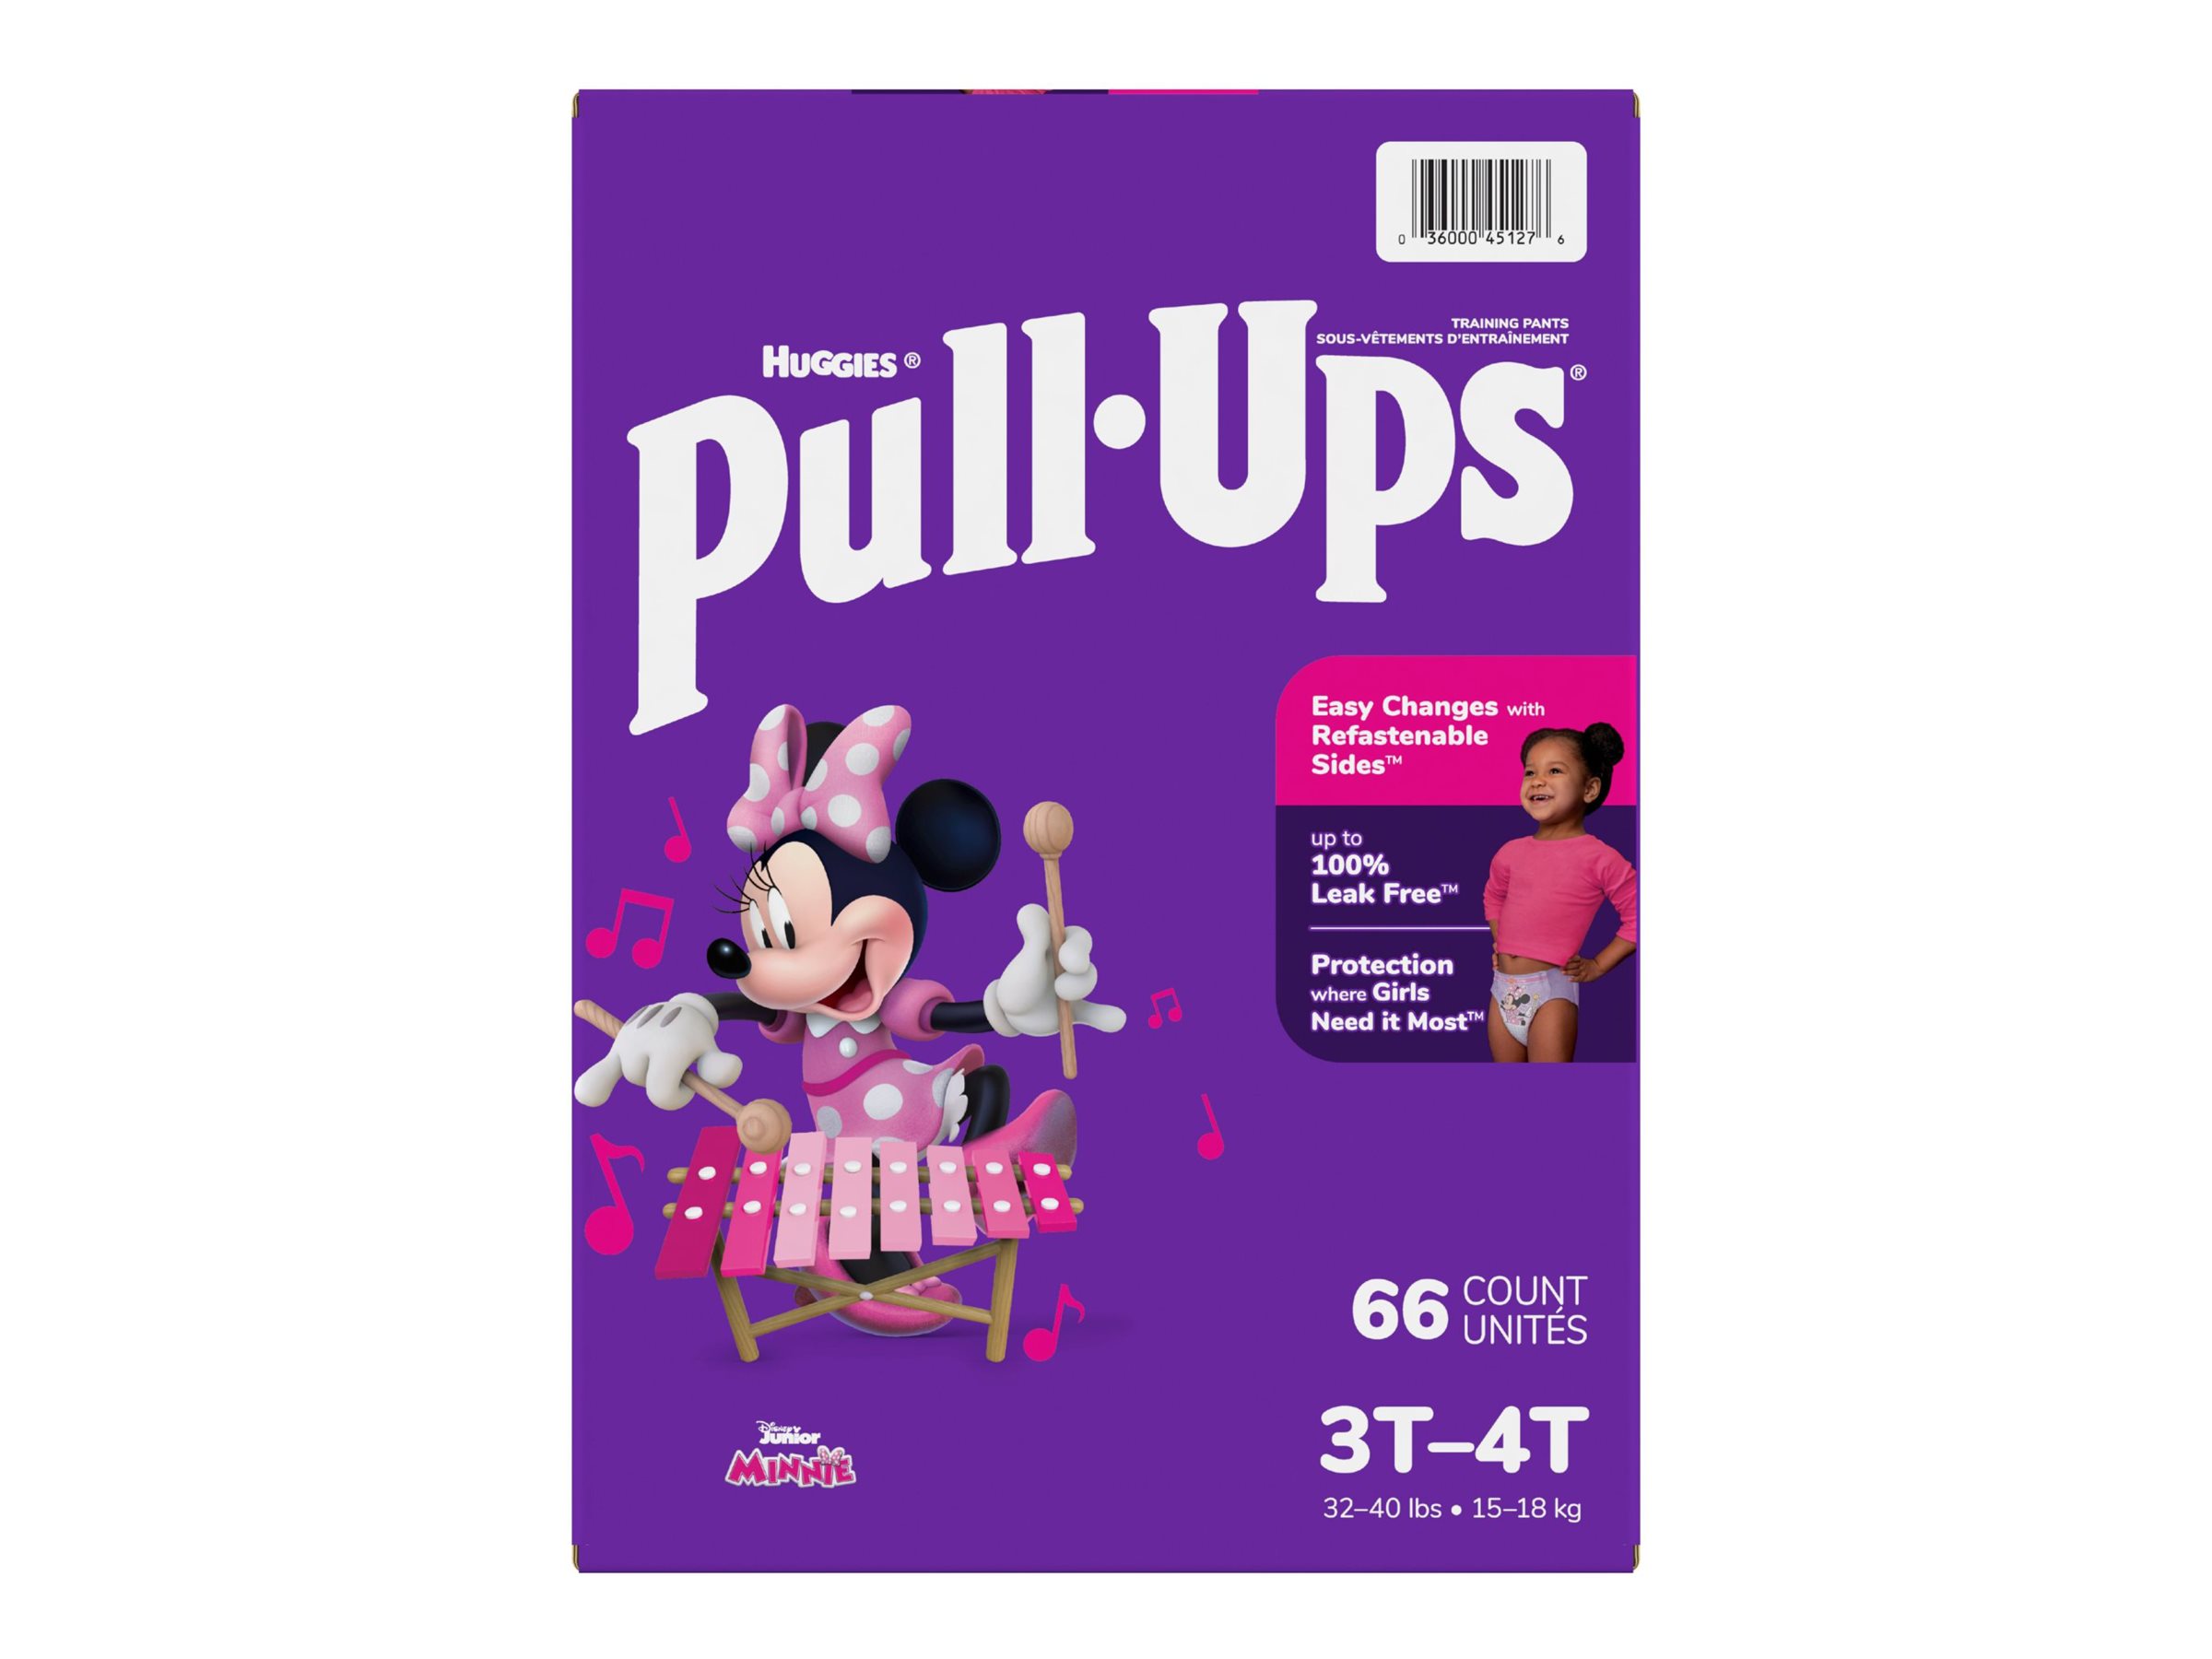 Pull-Ups Learning Designs Girls' Potty Training Pants, 3T-4T (32-40 lbs),  48 ct - Dillons Food Stores